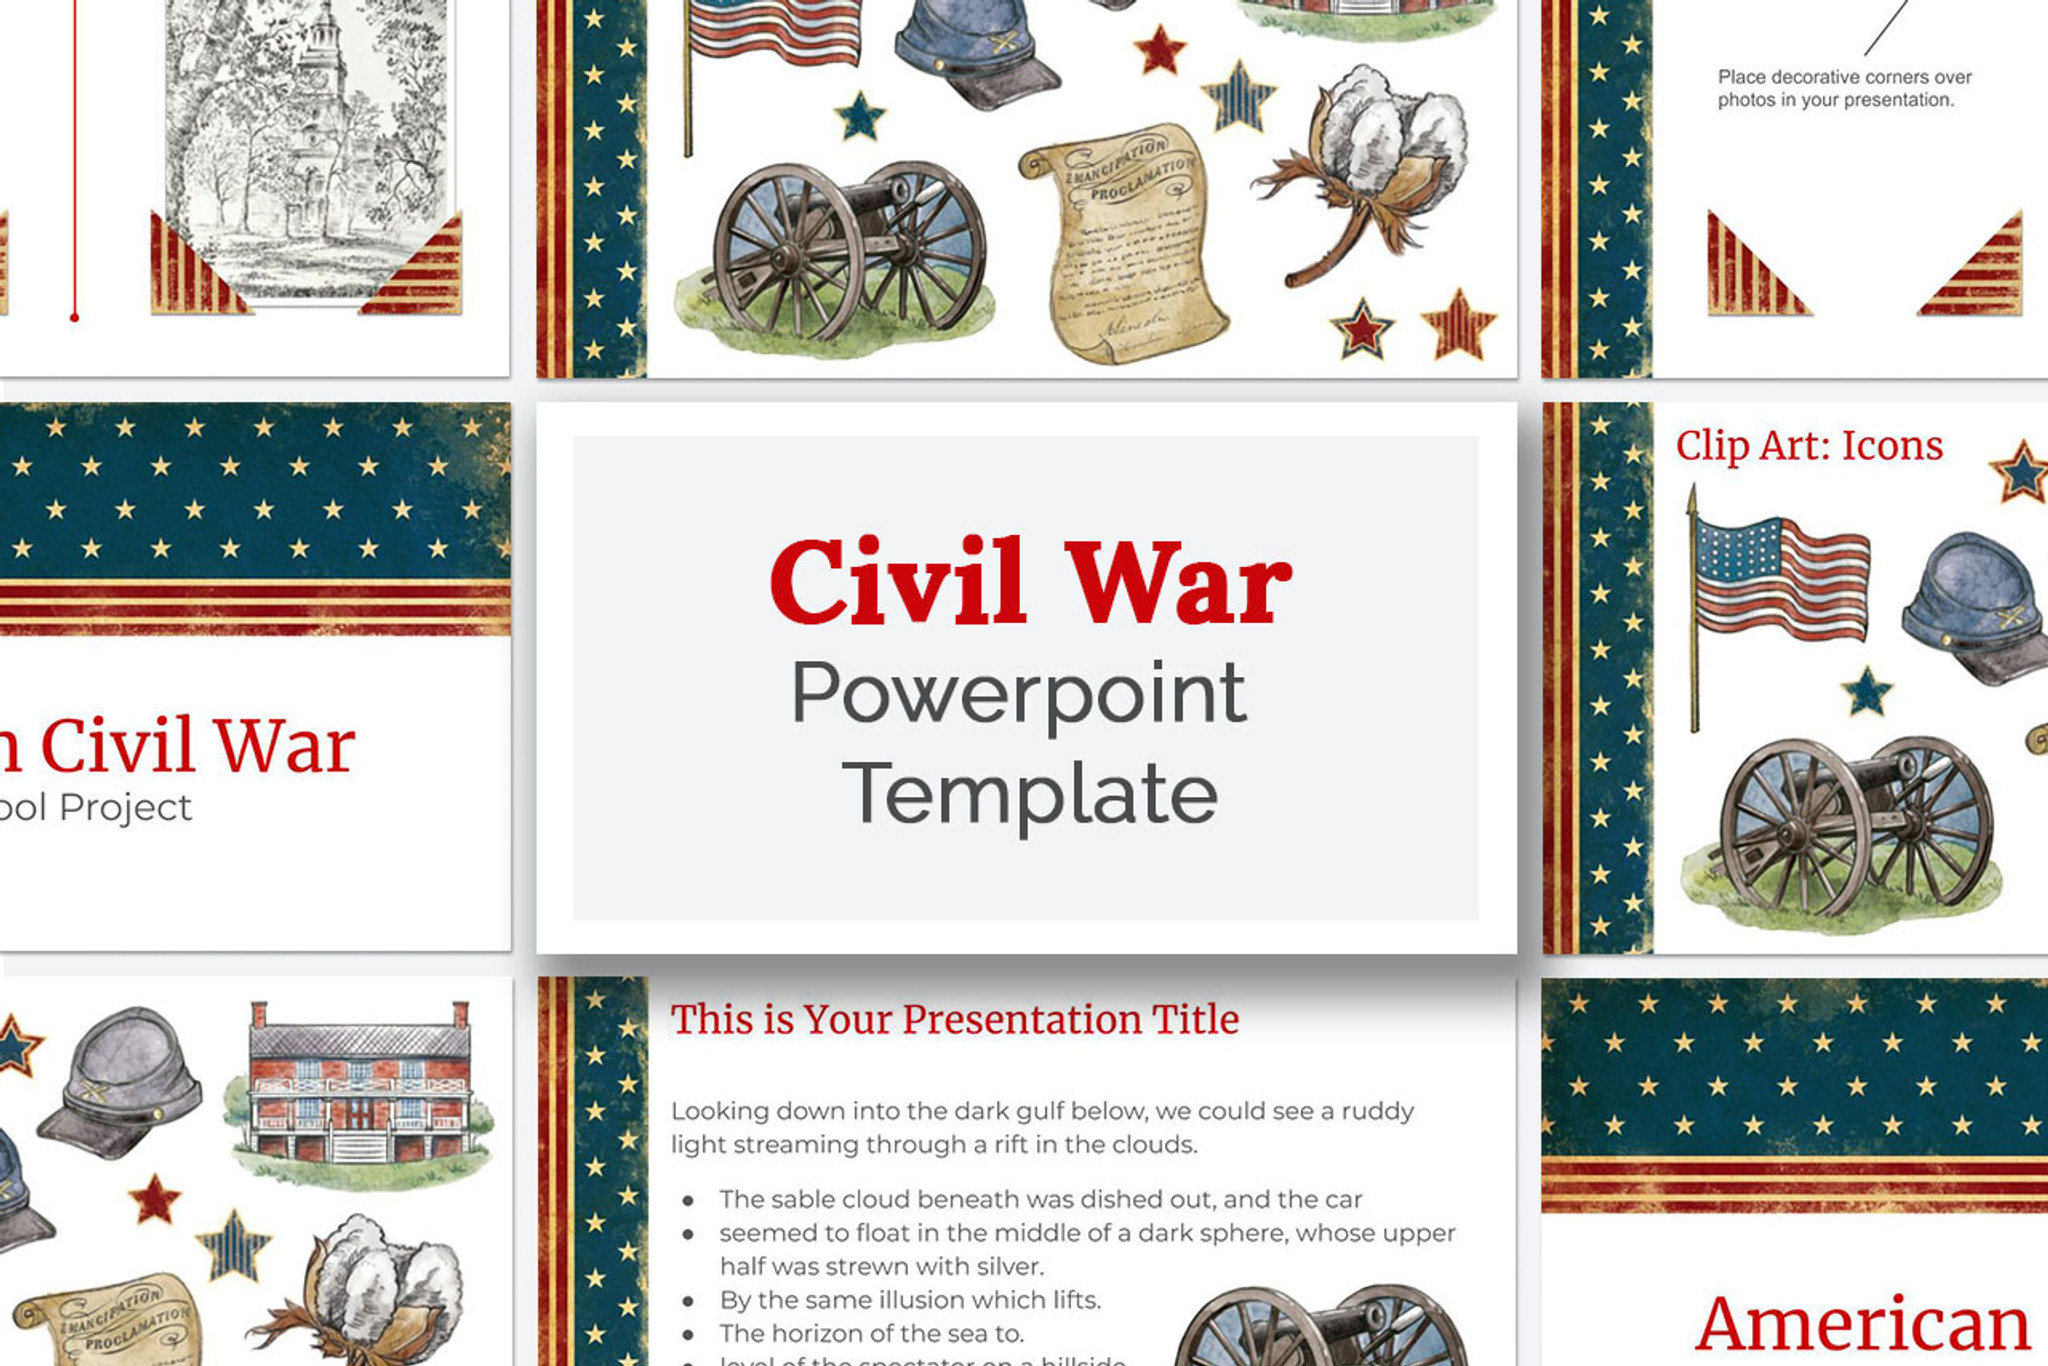 Topic 5 The American Civil War - ppt download